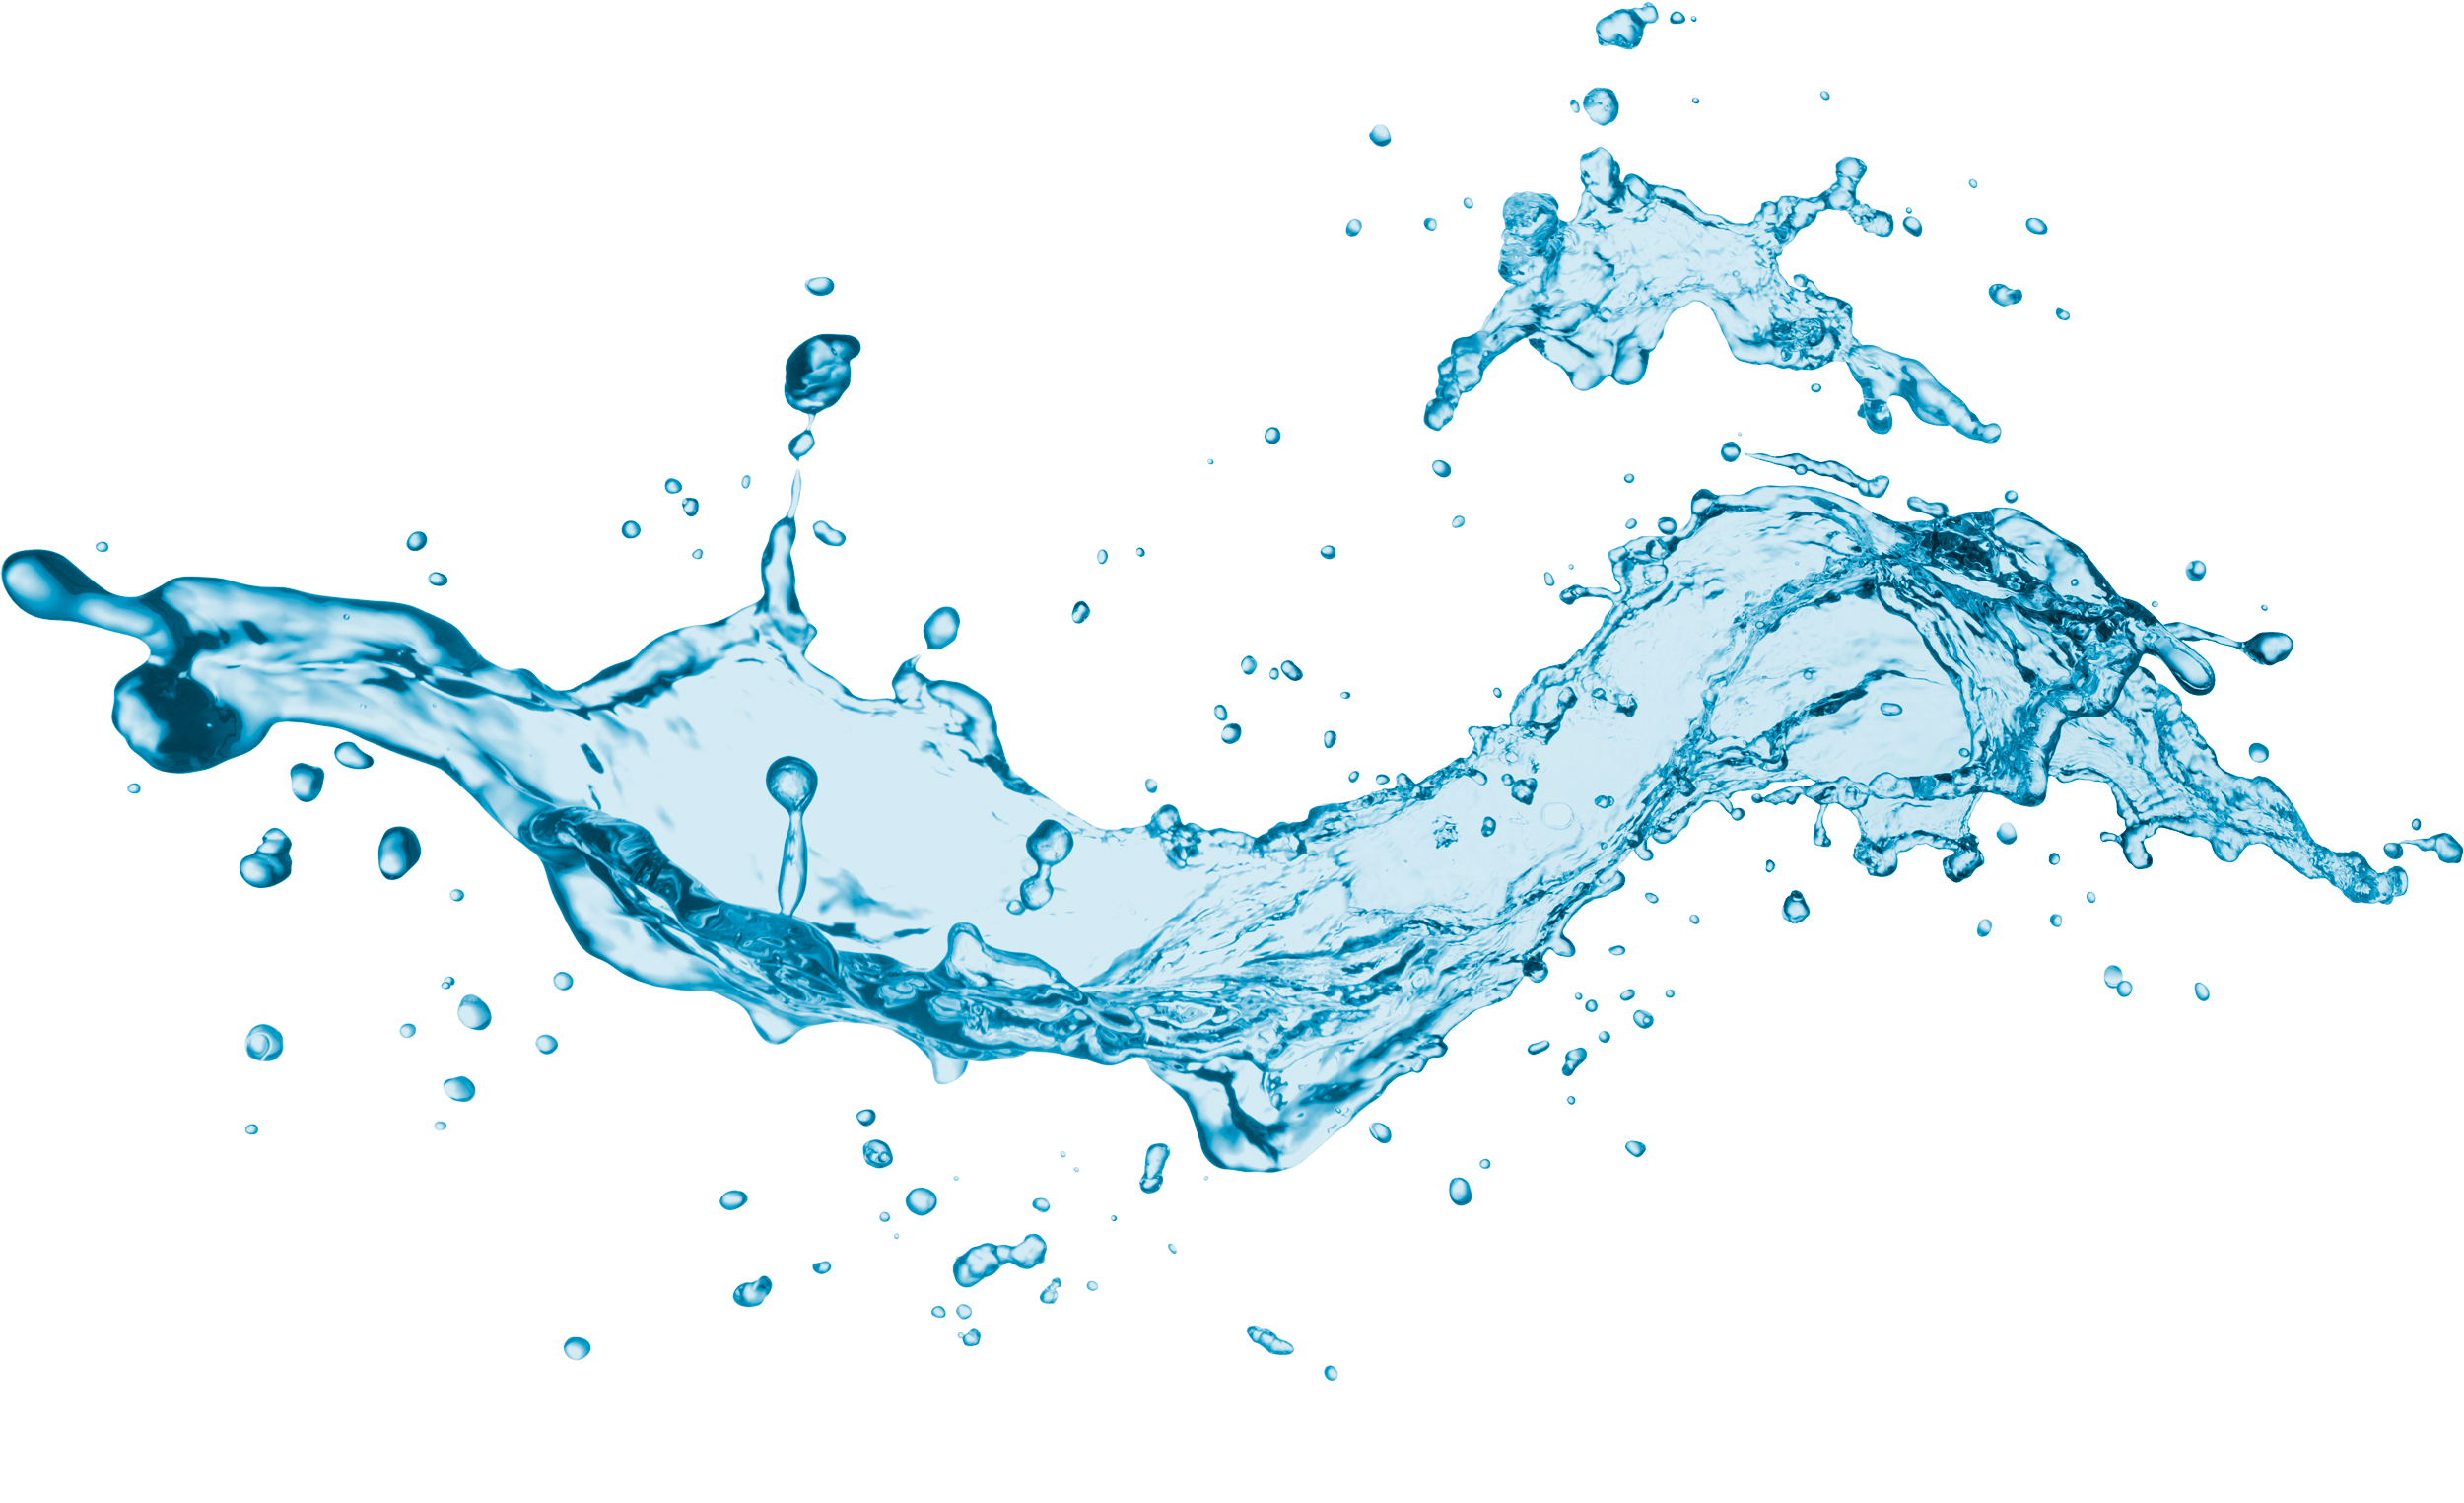 Water png images. Image free drops download